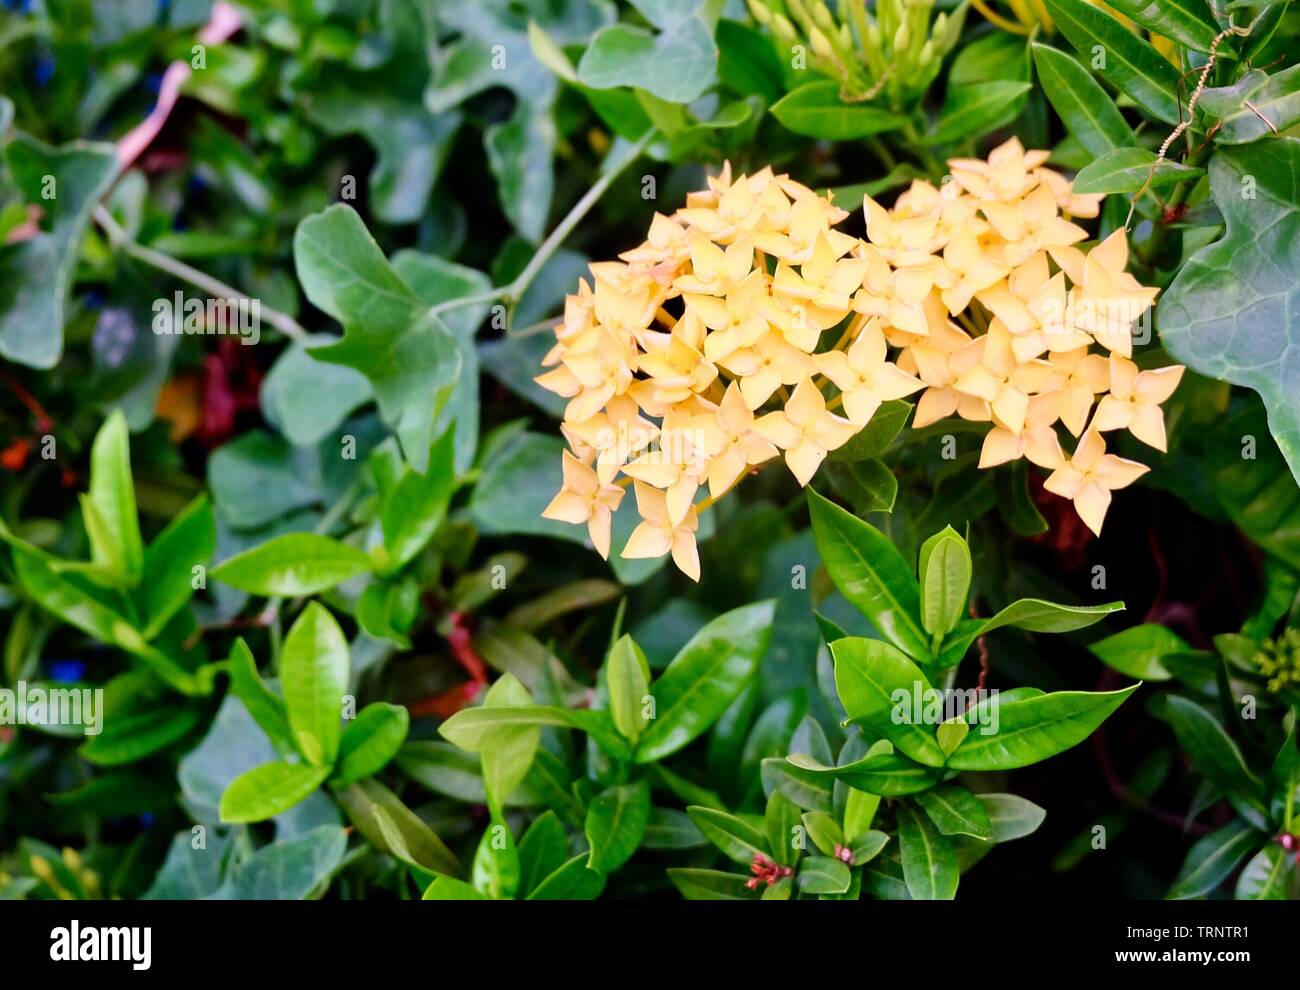 Beautiful Flower, Group of Fresh Yellow Ixora Flowers with Green Leaves on Tree in A Garden. Stock Photo